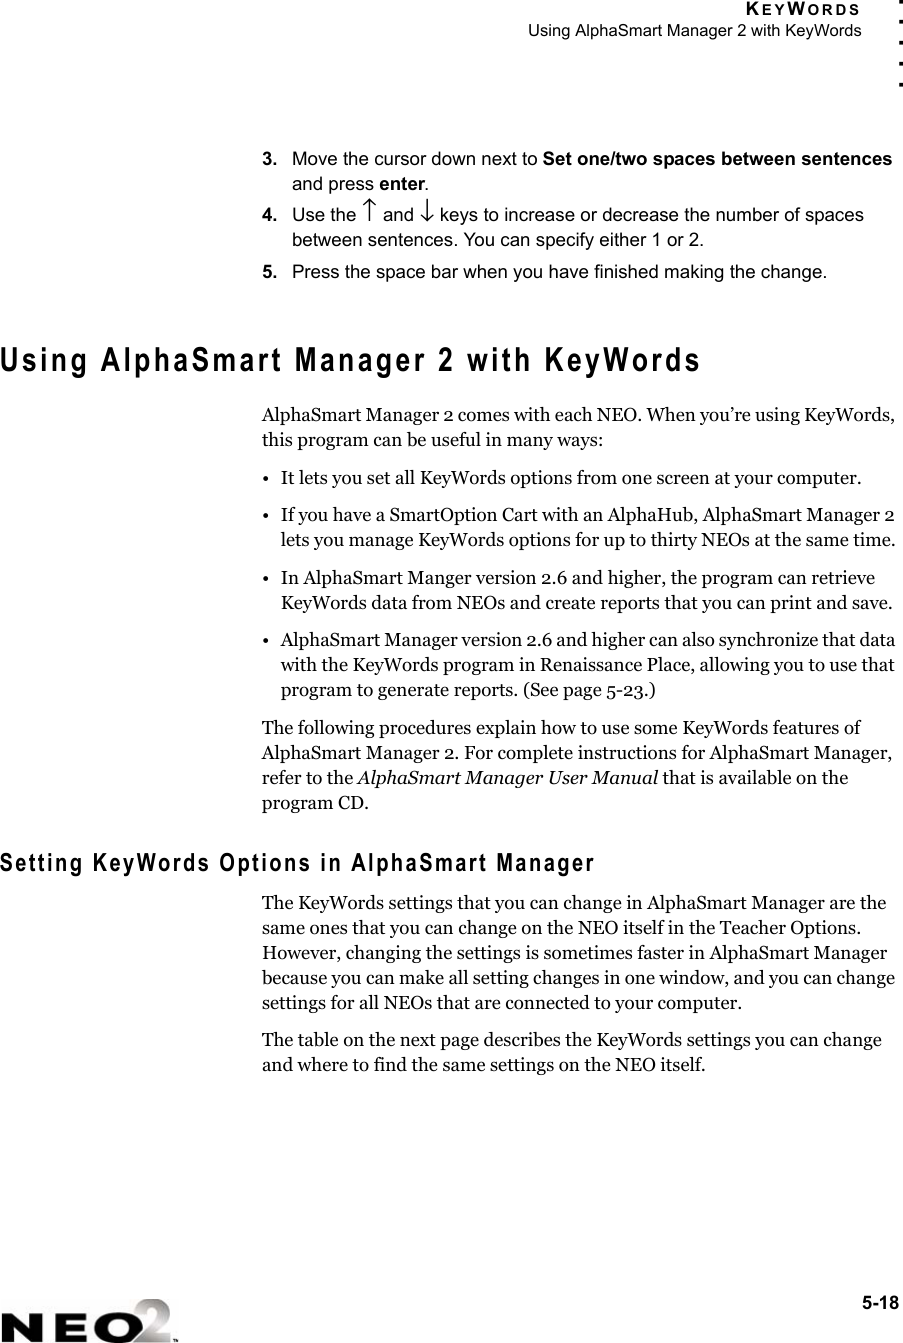 KEYWORDSUsing AlphaSmart Manager 2 with KeyWords5-18. . . . .3. Move the cursor down next to Set one/two spaces between sentences and press enter.4. Use the ↑ and ↓ keys to increase or decrease the number of spaces between sentences. You can specify either 1 or 2.5. Press the space bar when you have finished making the change.Using AlphaSmart Manager 2 with KeyWordsAlphaSmart Manager 2 comes with each NEO. When you’re using KeyWords, this program can be useful in many ways:• It lets you set all KeyWords options from one screen at your computer.• If you have a SmartOption Cart with an AlphaHub, AlphaSmart Manager 2 lets you manage KeyWords options for up to thirty NEOs at the same time.• In AlphaSmart Manger version 2.6 and higher, the program can retrieve KeyWords data from NEOs and create reports that you can print and save.• AlphaSmart Manager version 2.6 and higher can also synchronize that data with the KeyWords program in Renaissance Place, allowing you to use that program to generate reports. (See page 5-23.)The following procedures explain how to use some KeyWords features of AlphaSmart Manager 2. For complete instructions for AlphaSmart Manager, refer to the AlphaSmart Manager User Manual that is available on the program CD.Setting KeyWords Options in AlphaSmart ManagerThe KeyWords settings that you can change in AlphaSmart Manager are the same ones that you can change on the NEO itself in the Teacher Options. However, changing the settings is sometimes faster in AlphaSmart Manager because you can make all setting changes in one window, and you can change settings for all NEOs that are connected to your computer.The table on the next page describes the KeyWords settings you can change and where to find the same settings on the NEO itself.